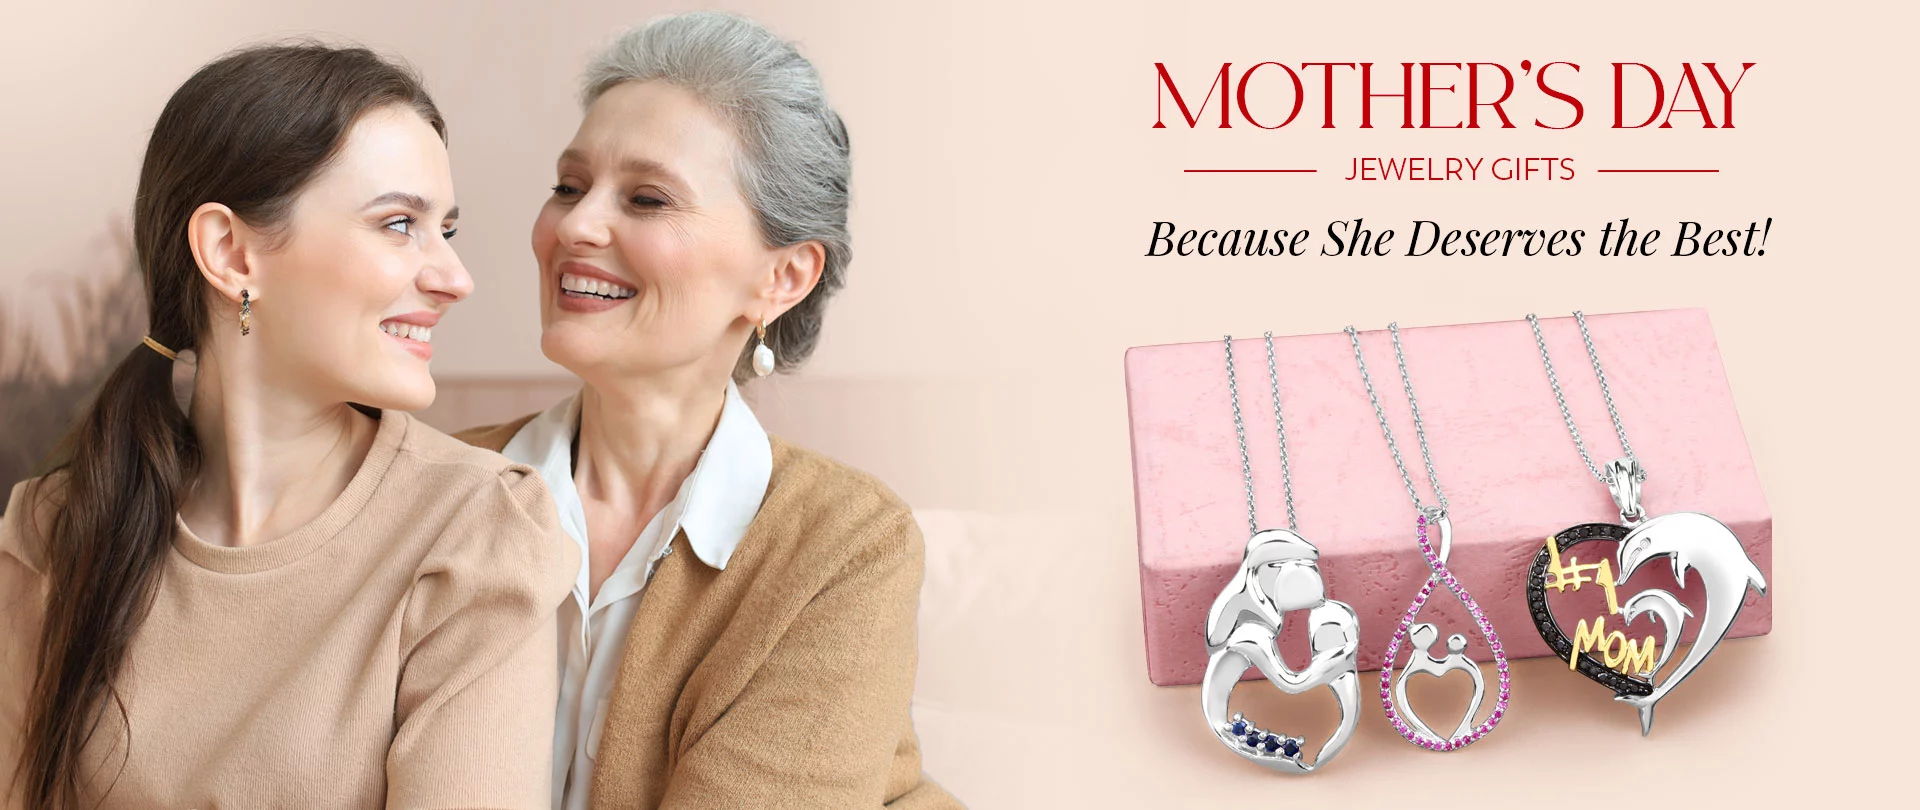 Discover the perfect Mother's Day gift with HauteFacets' curated gift guide. From elegant jewelry pieces to timeless treasures, find the ideal expression of love for Mom. Explore now!